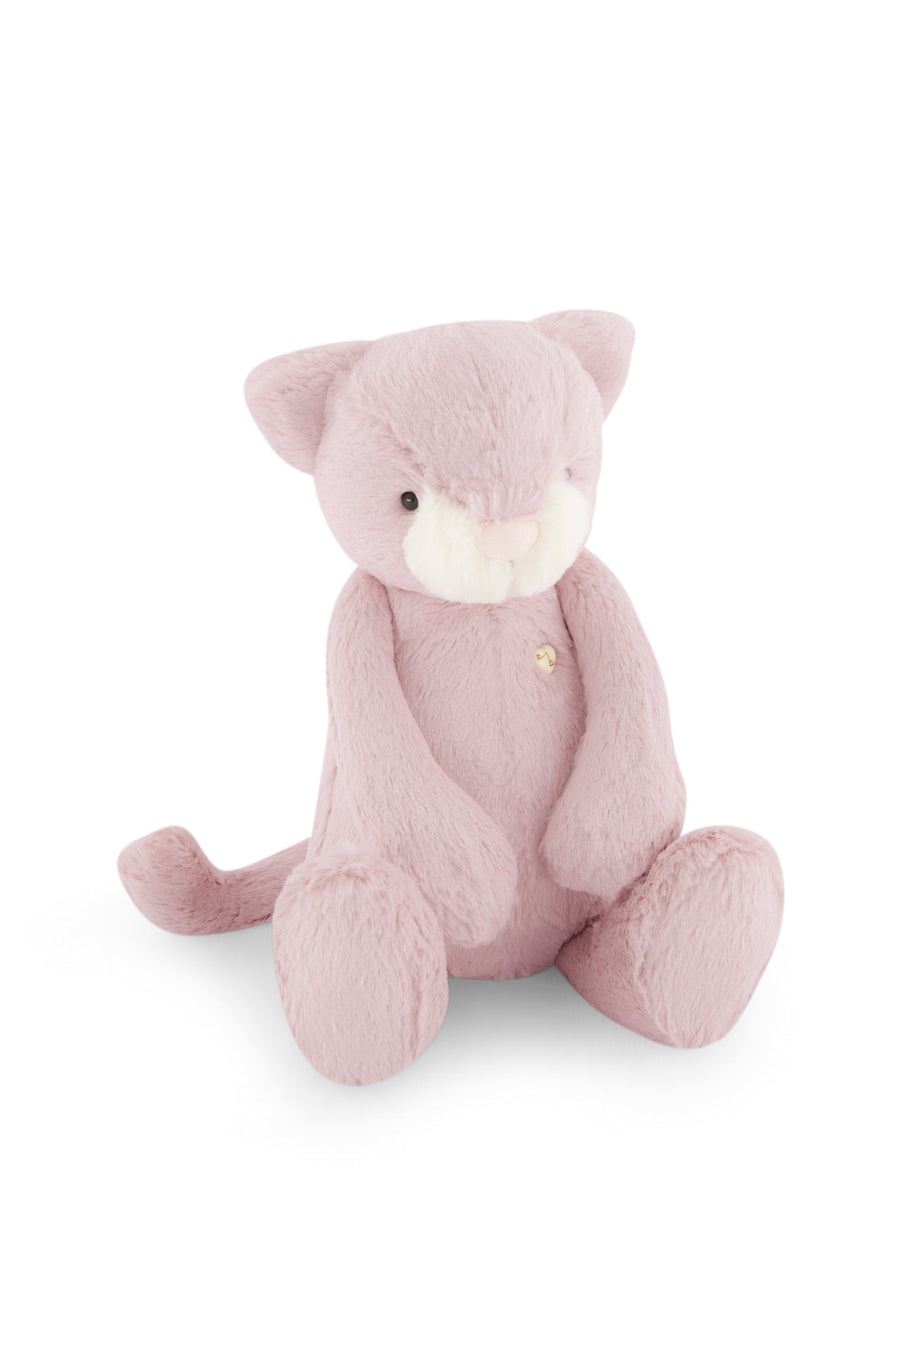 Snuggle Bunnies - Elsie the Kitty - Powder Pink Childrens Toy from Jamie Kay NZ